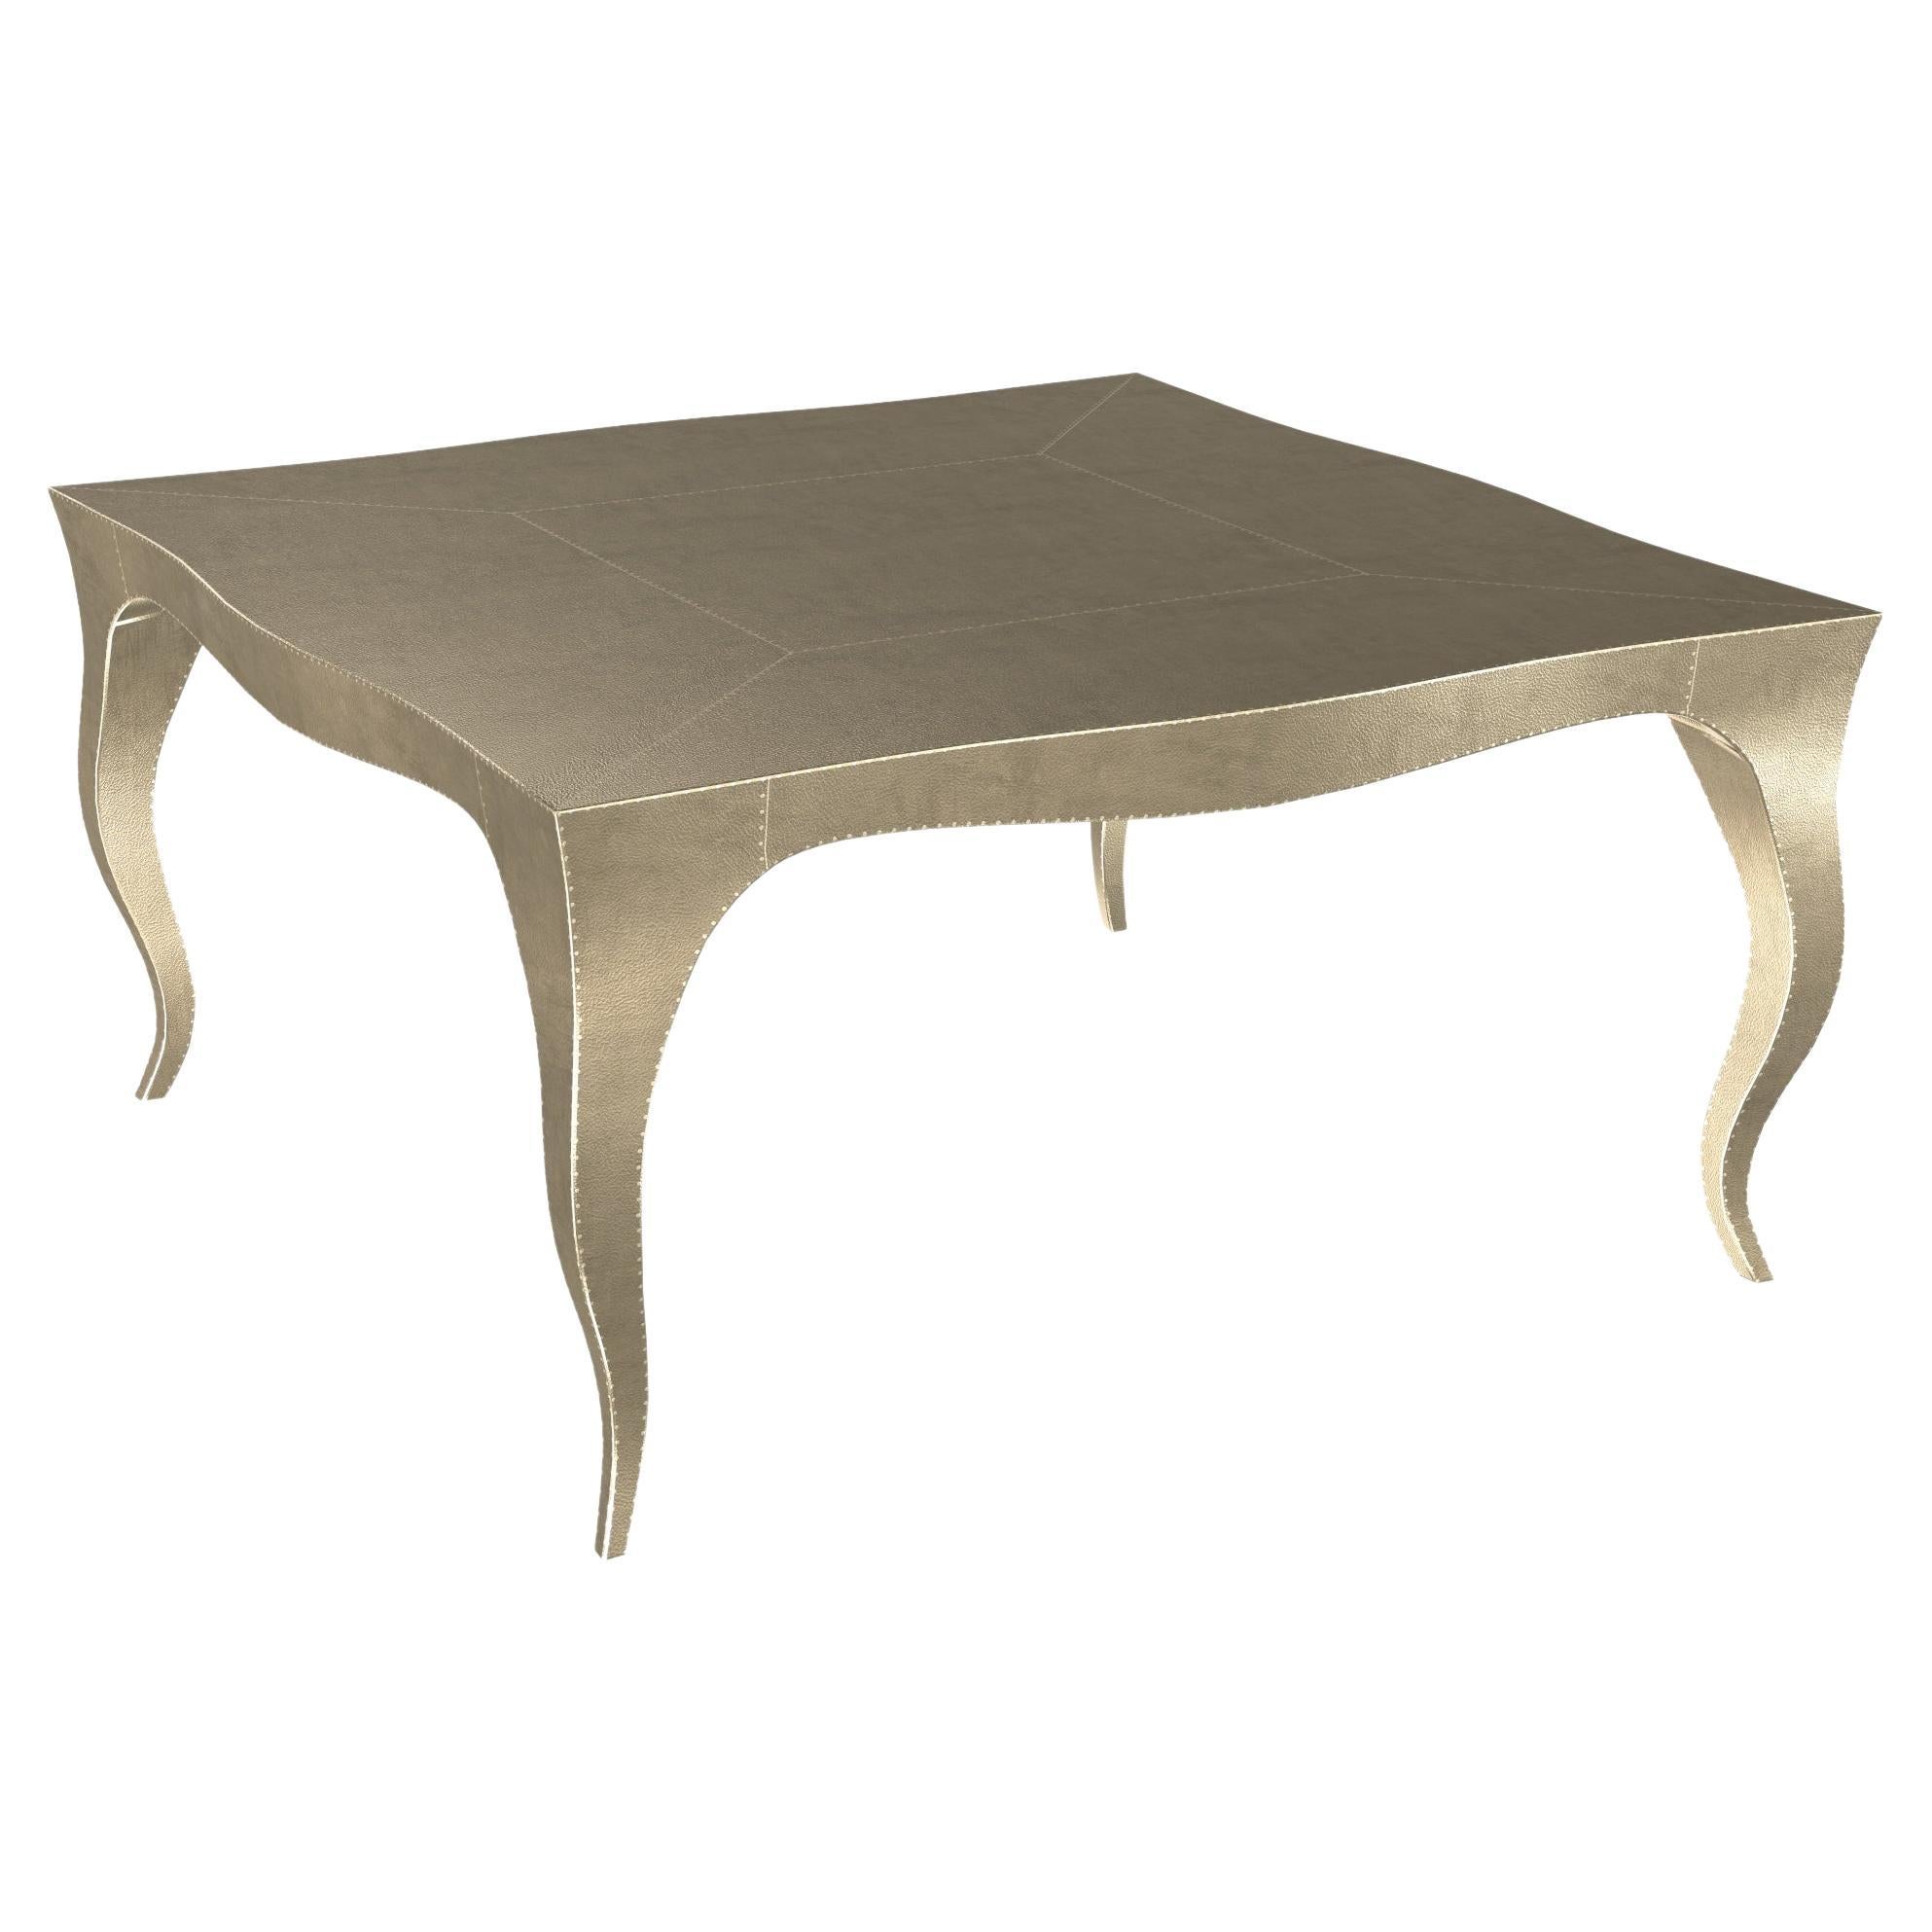 Louise Art Deco Nesting Tables Fine Hammered Brass 18.5x18.5x10 inch by Paul M